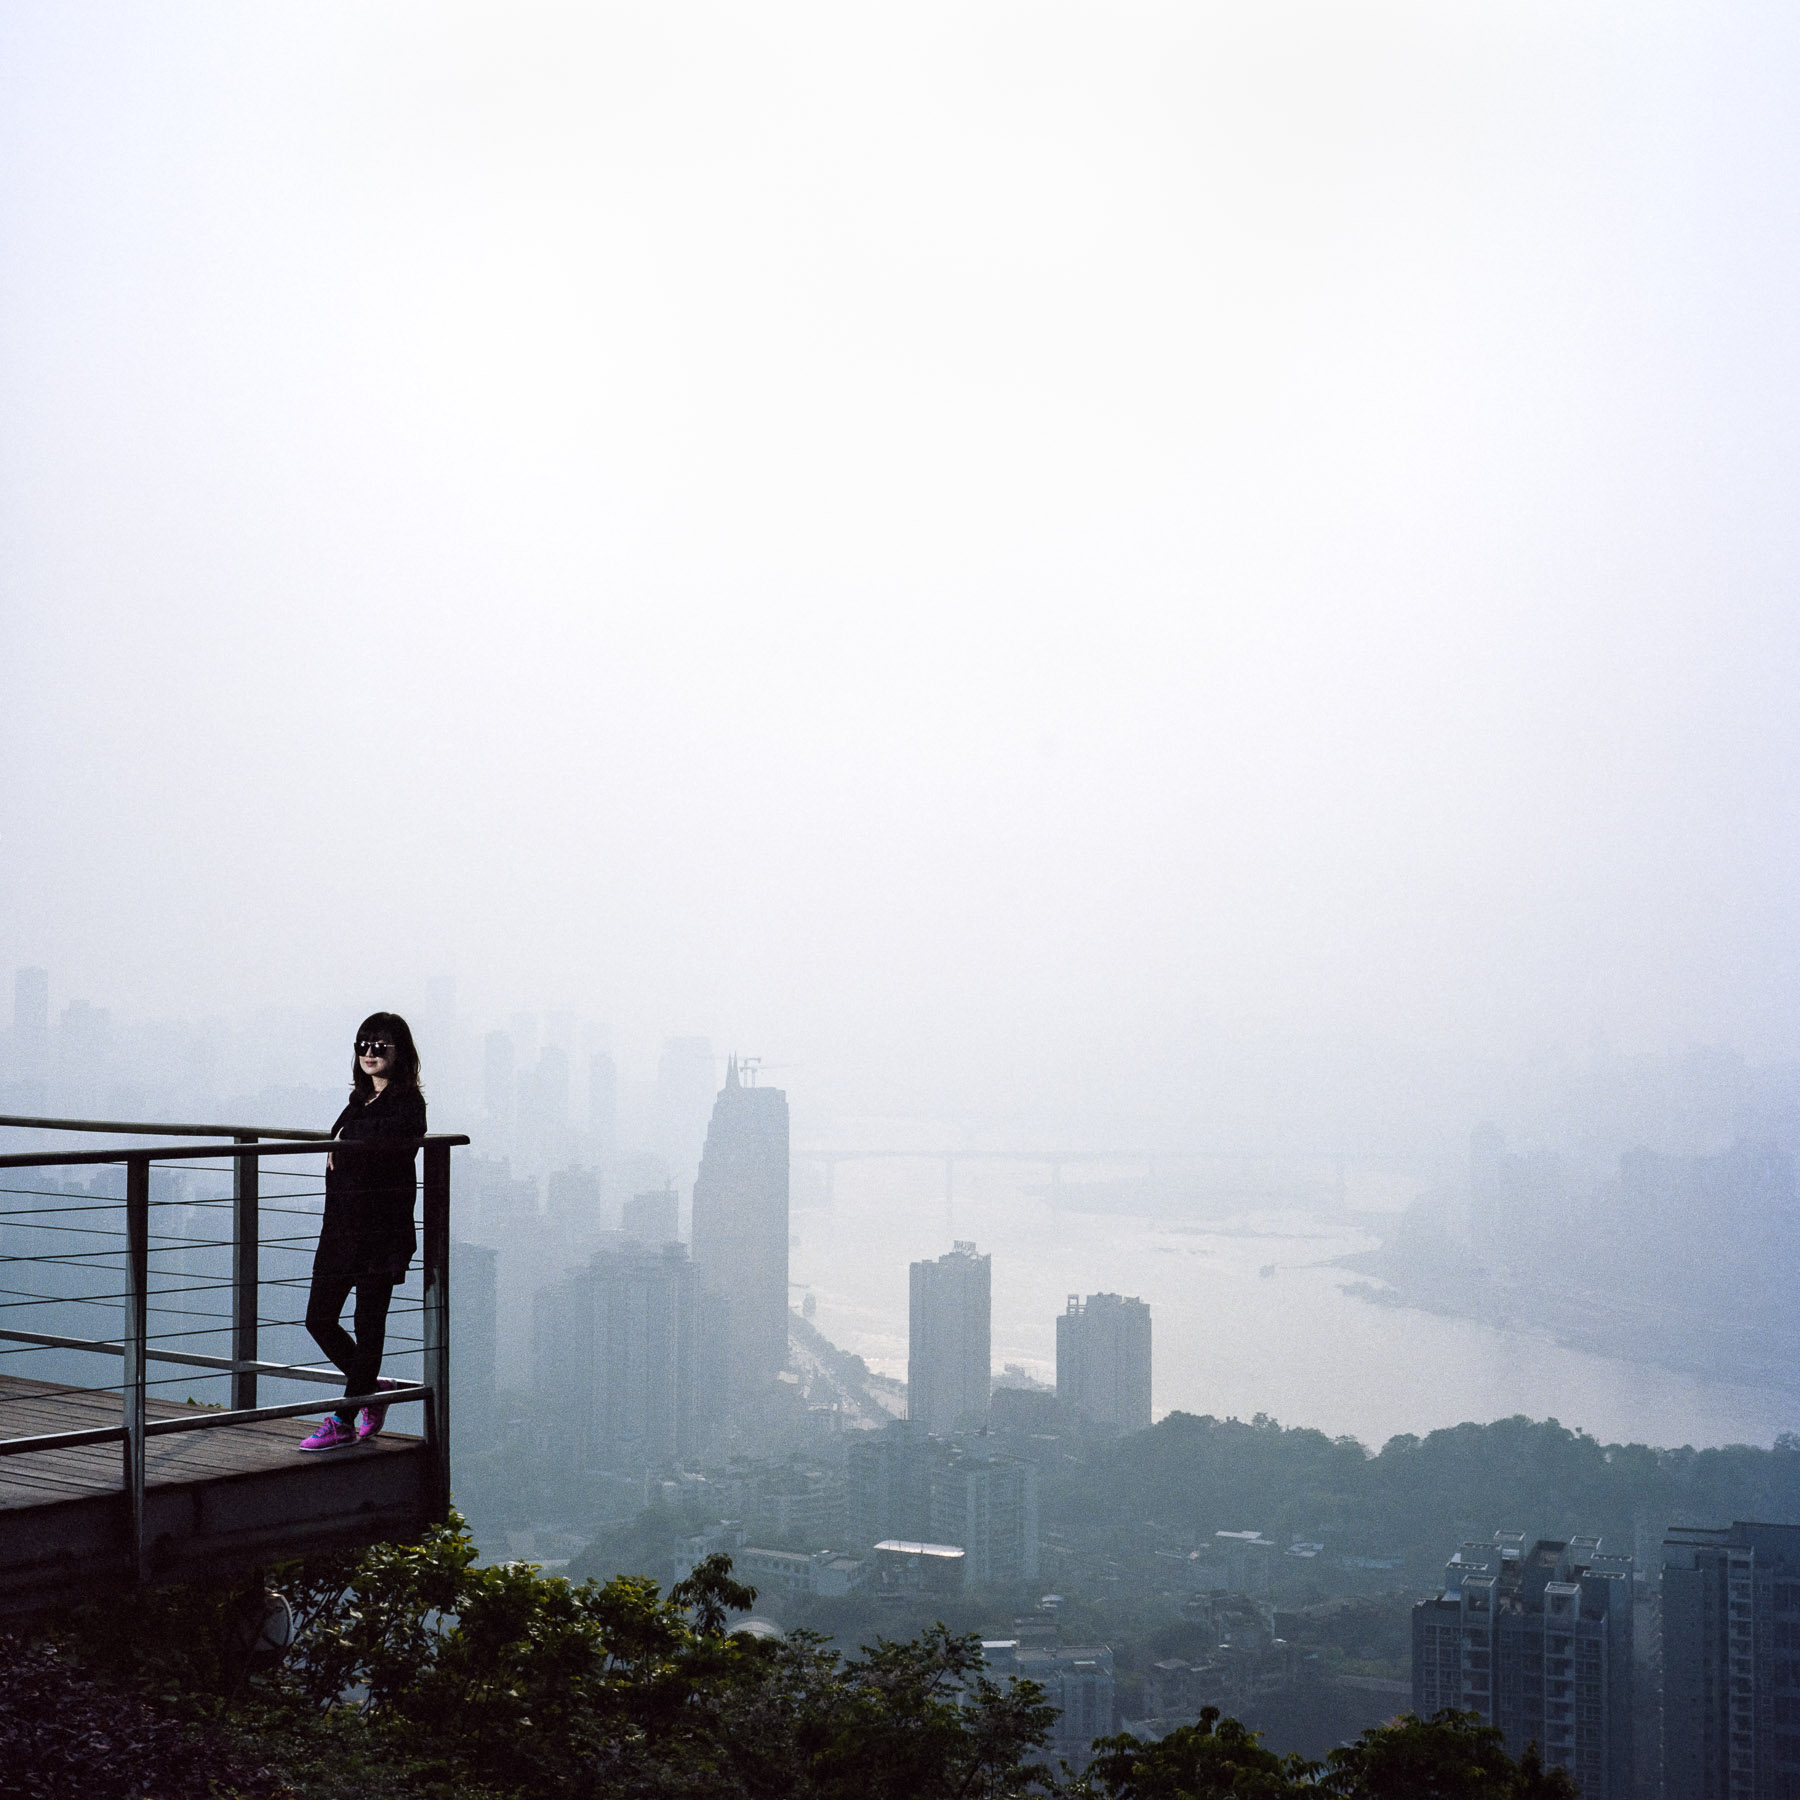  Chongqing, China. 2013. Portrait of a Chinese girl with a view of the downtown area of Chongqing's cityscape, the central Peninsula (Yu Zhong Ban Dao), over the Yangtze river from the Nanshan mountain.
Chongqing is a major city in the Southwest of C